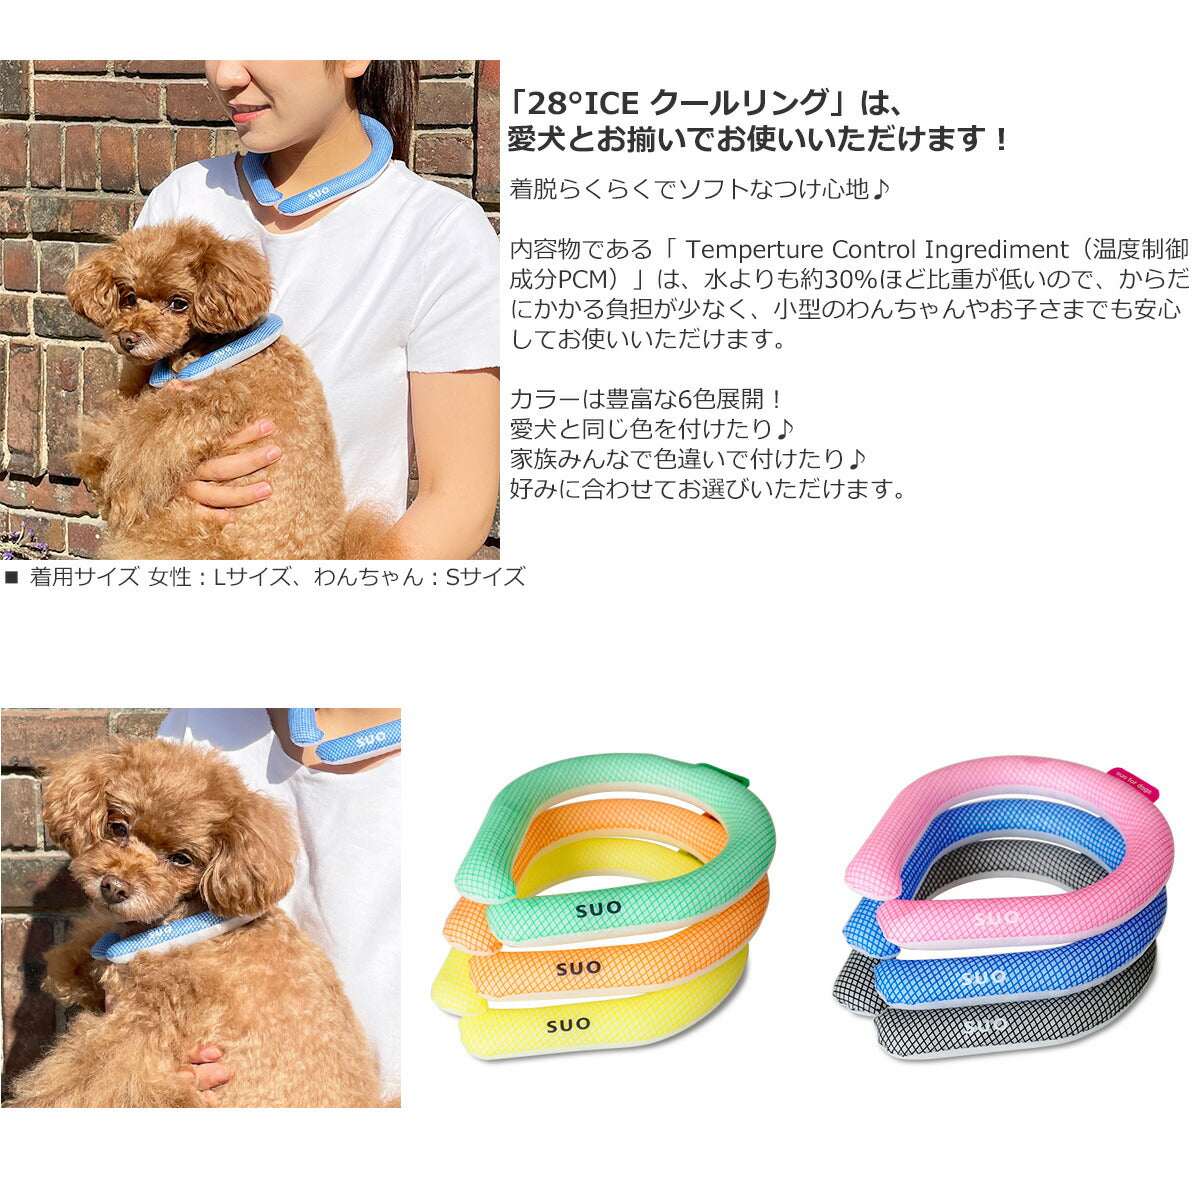 SUO for dogs 28°ICE SUOリング ボタンなし M イエロー 熱中症対策グッズ 暑さ対策 ひんやり 首 冷感 犬 大人 子供